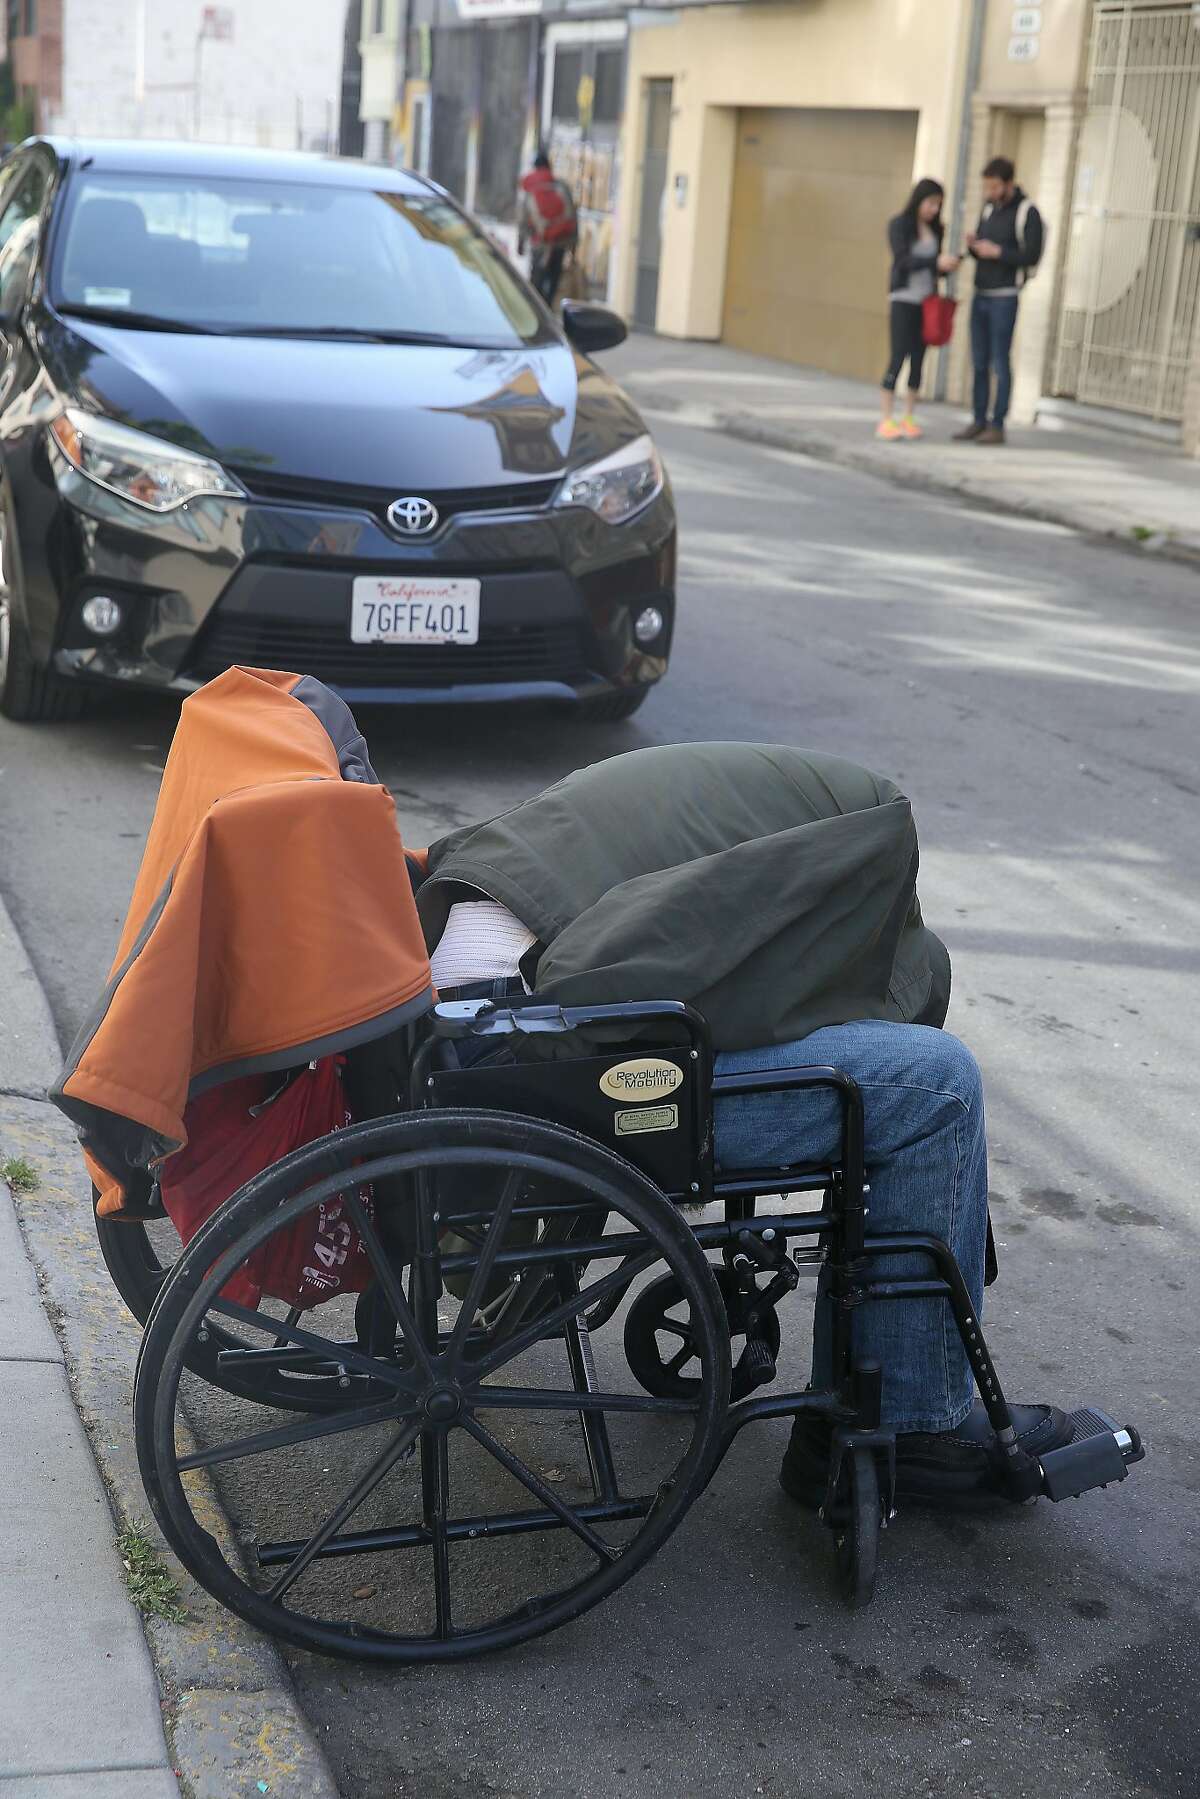 A man sleeping in his wheel chair on Natoma St. on Friday, April 20, 2018, in San Francisco, Calif. City Hall has taken decisive action on scooters plaguing SOMA sidewalks, but has taken little action on homeless, drug use, and feces woes such as this man.